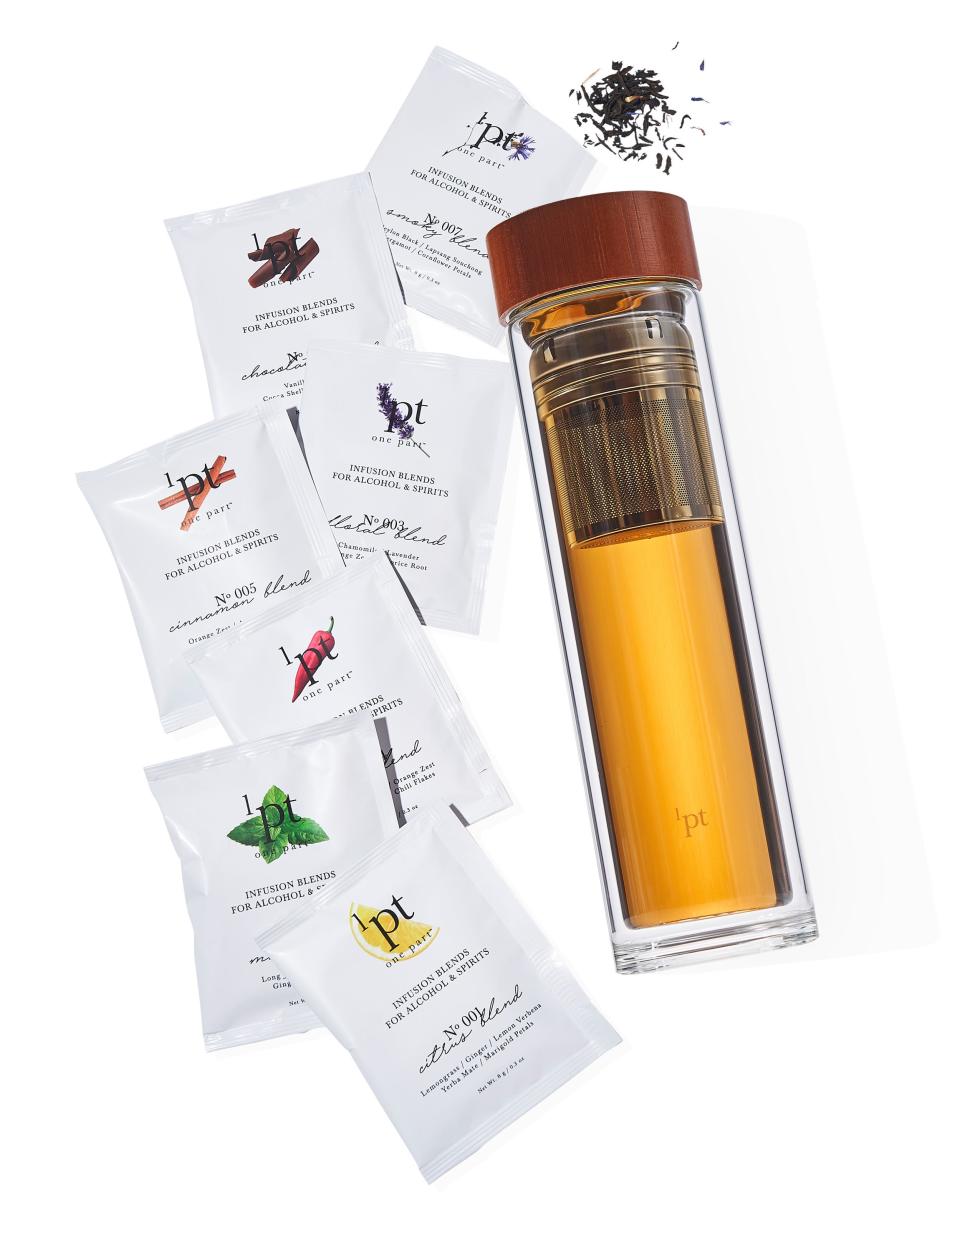 One Part Co. cocktail infusion master kit